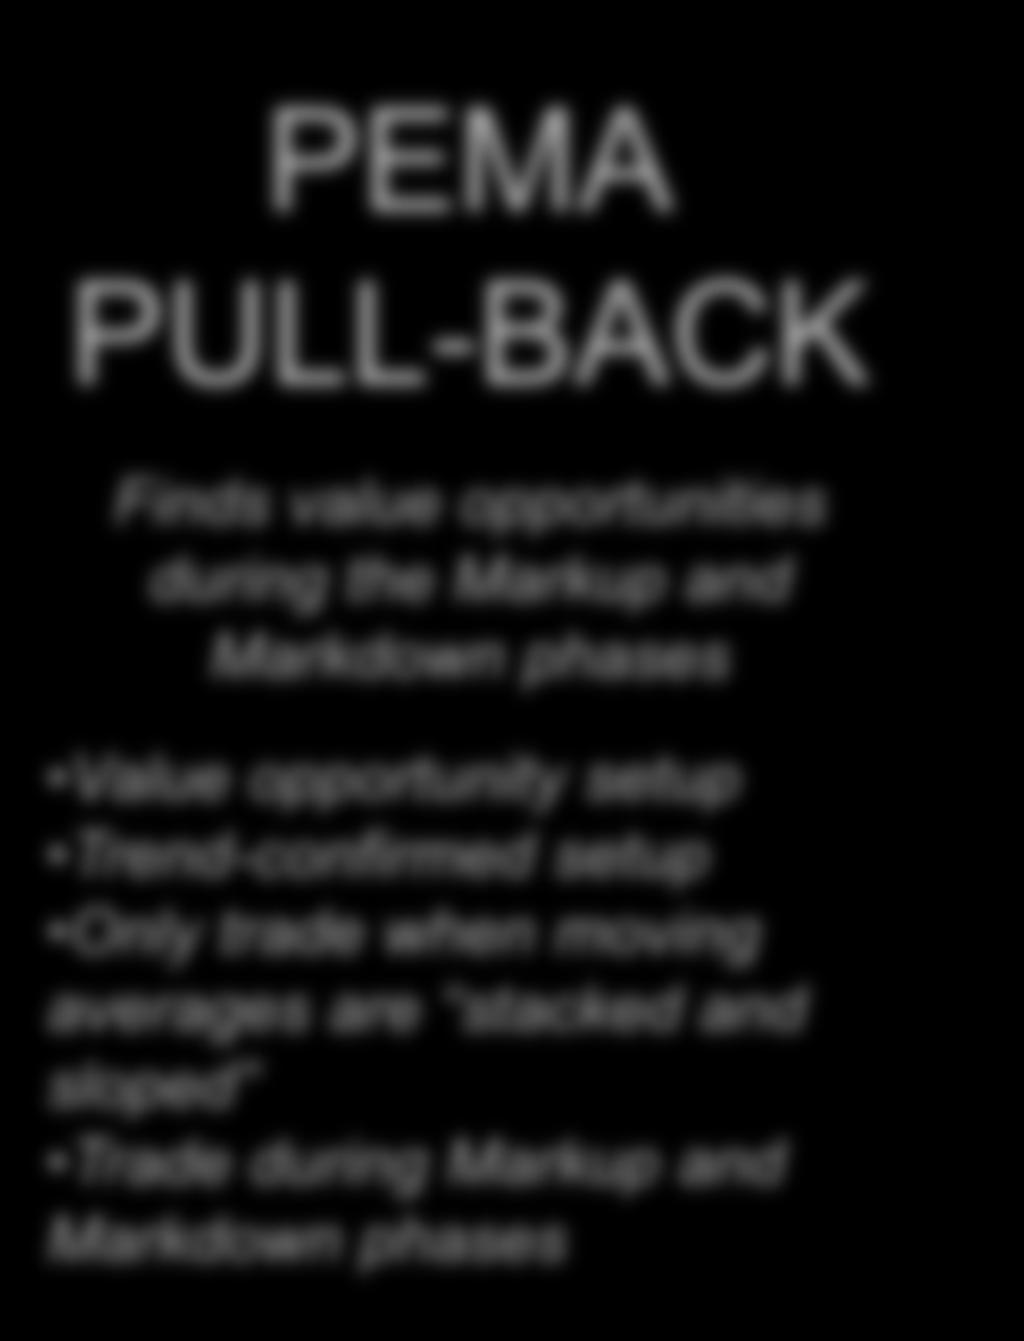 PEMA PULL-BACK The PEMA Pull-Back setup is used to identify value opportunities during trending markets using pivot-based moving averages.